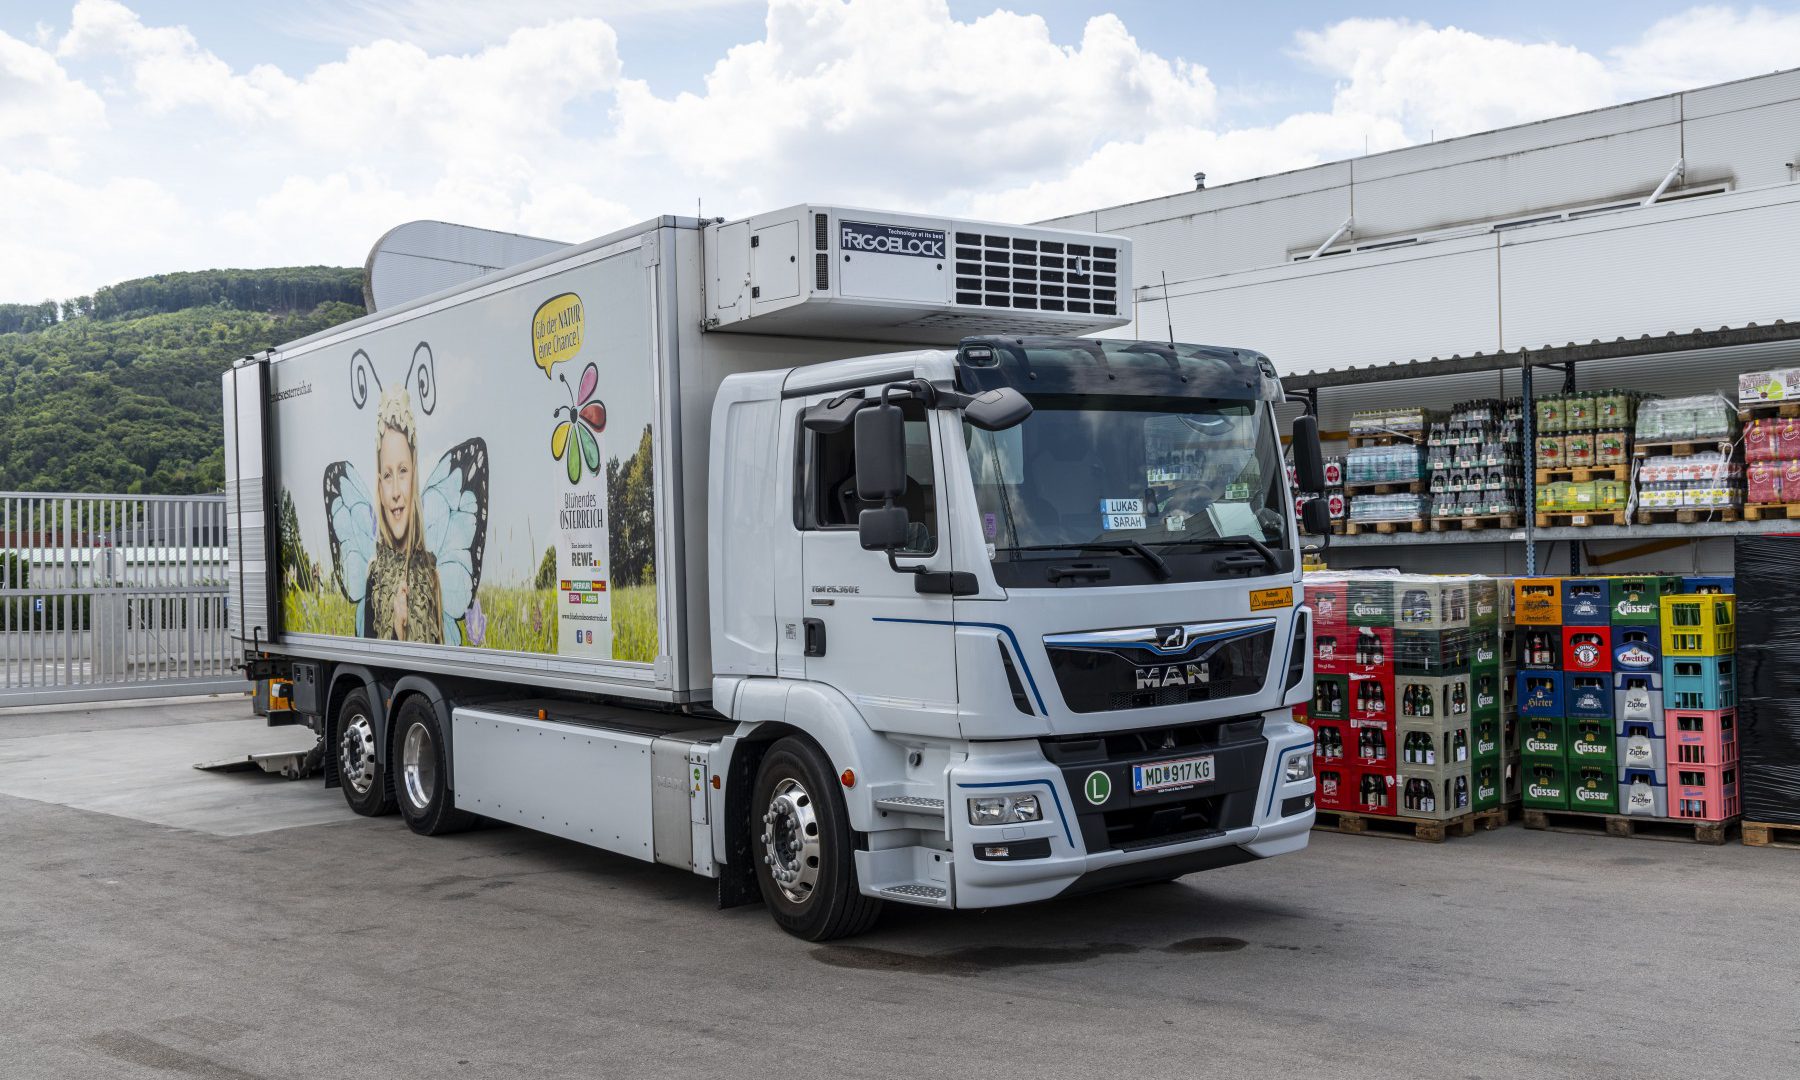 MAN TGX also „Sustainable Truck of the Year 2022”